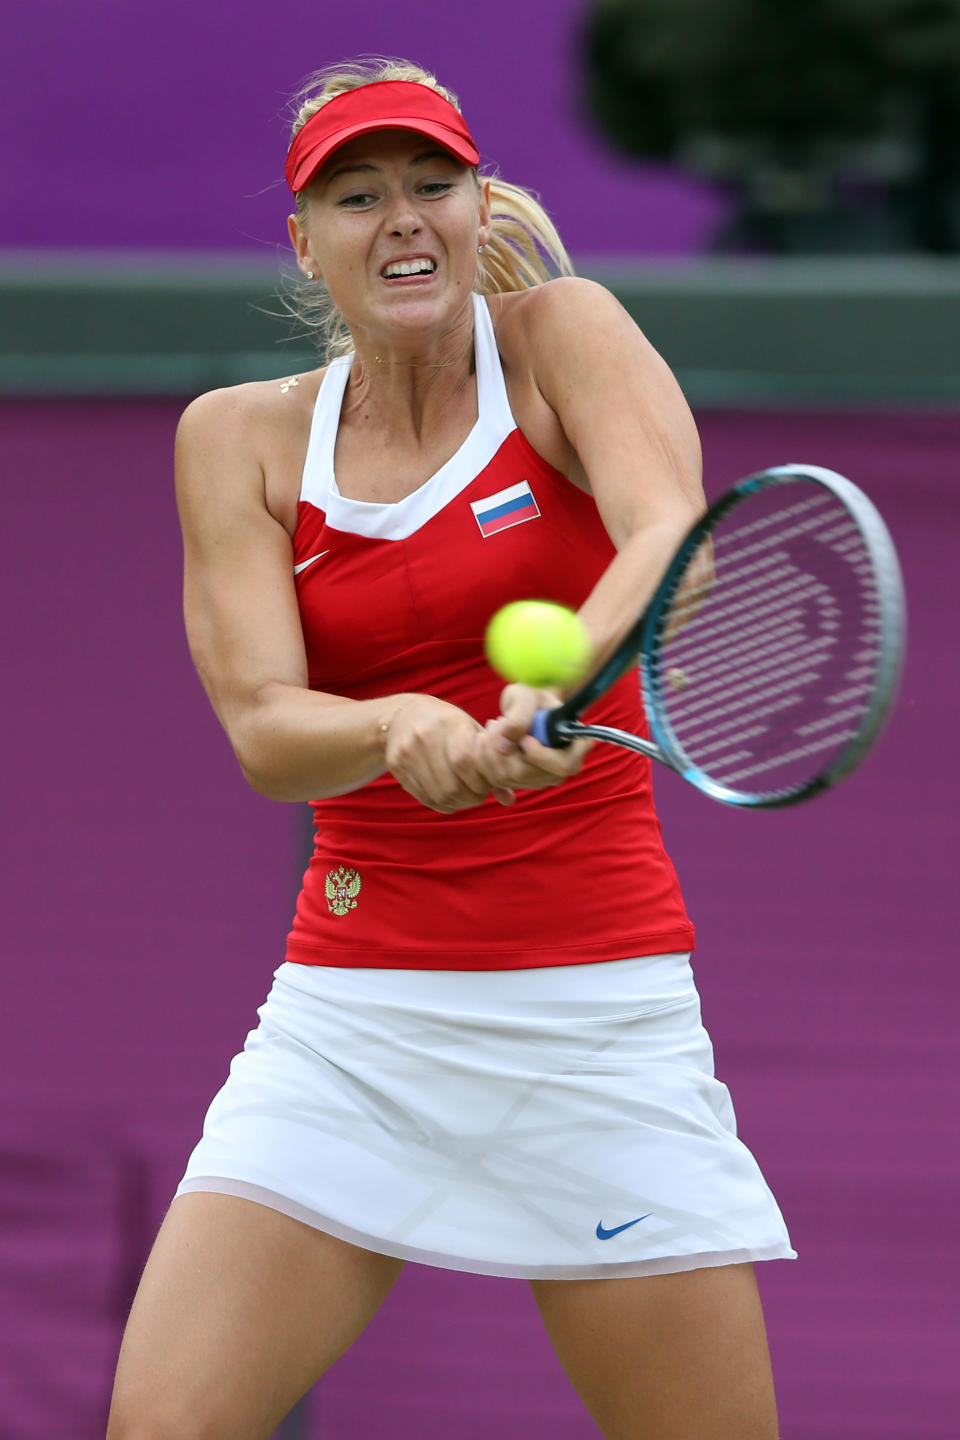 LONDON, ENGLAND - AUGUST 01: Maria Sharapova of Russia returns the ball against Sabine Lisicki of Germany during the third round of Women's Singles Tennis on Day 5 of the London 2012 Olympic Games at Wimbledon on August 1, 2012 in London, England. (Photo by Clive Brunskill/Getty Images)